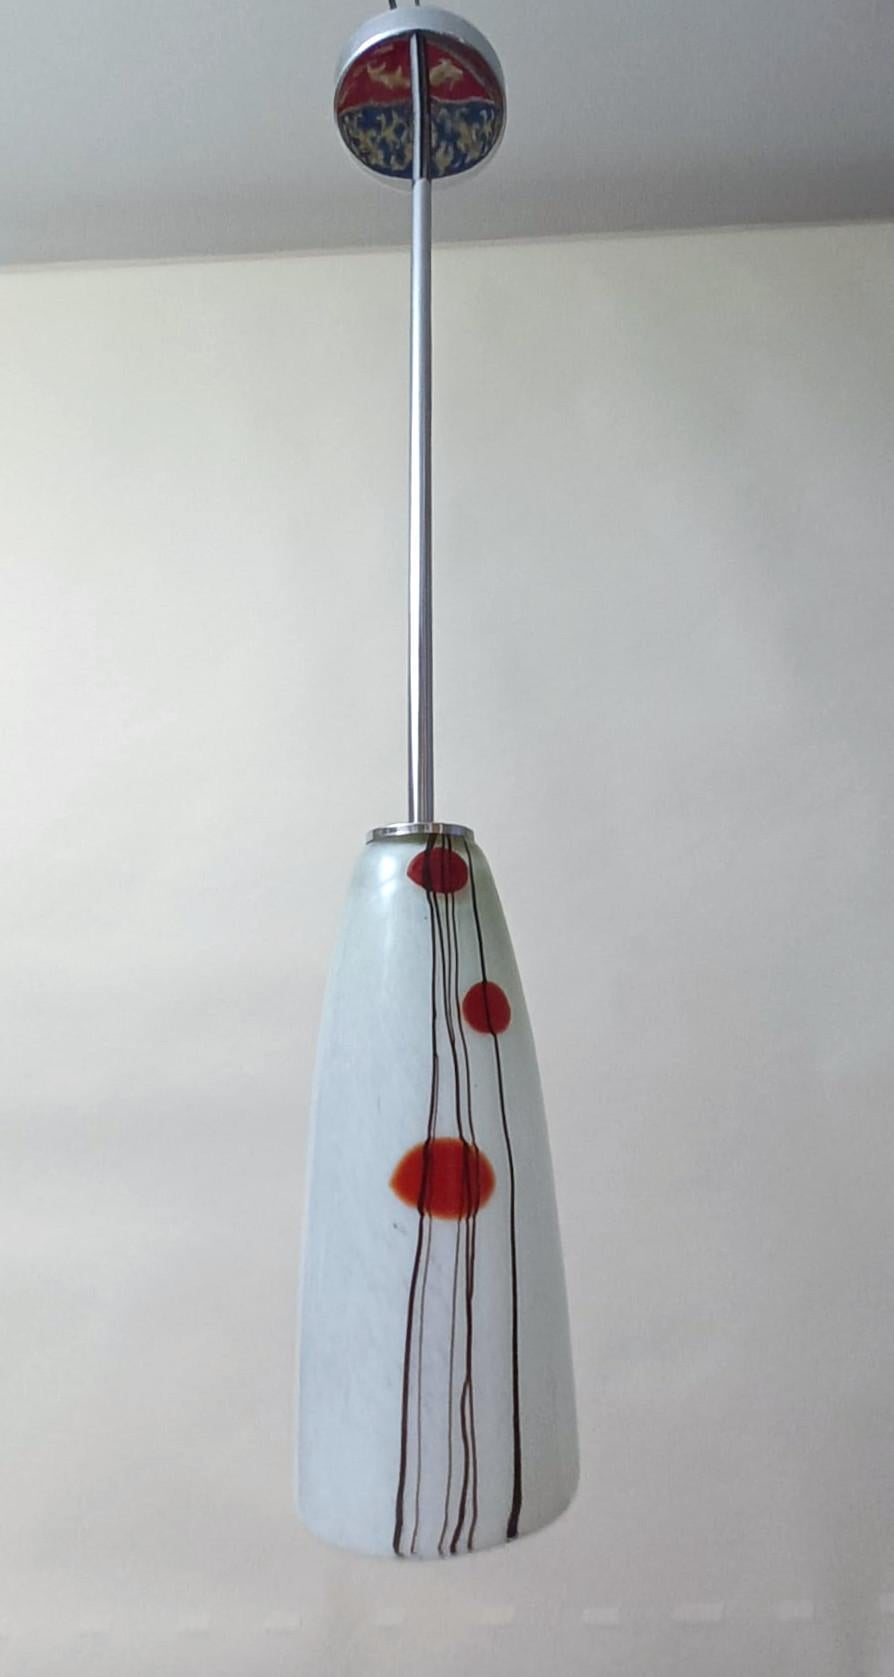 Vintage Italian pendant with cone shaped Murano glass shade, mounted on chrome stem / Made in Italy, circa 1960s
Measures: Diameter 4.5 inches, height 10 inches, total height 31 inches including rod and canopy
1 light / E12 or E14 type / max